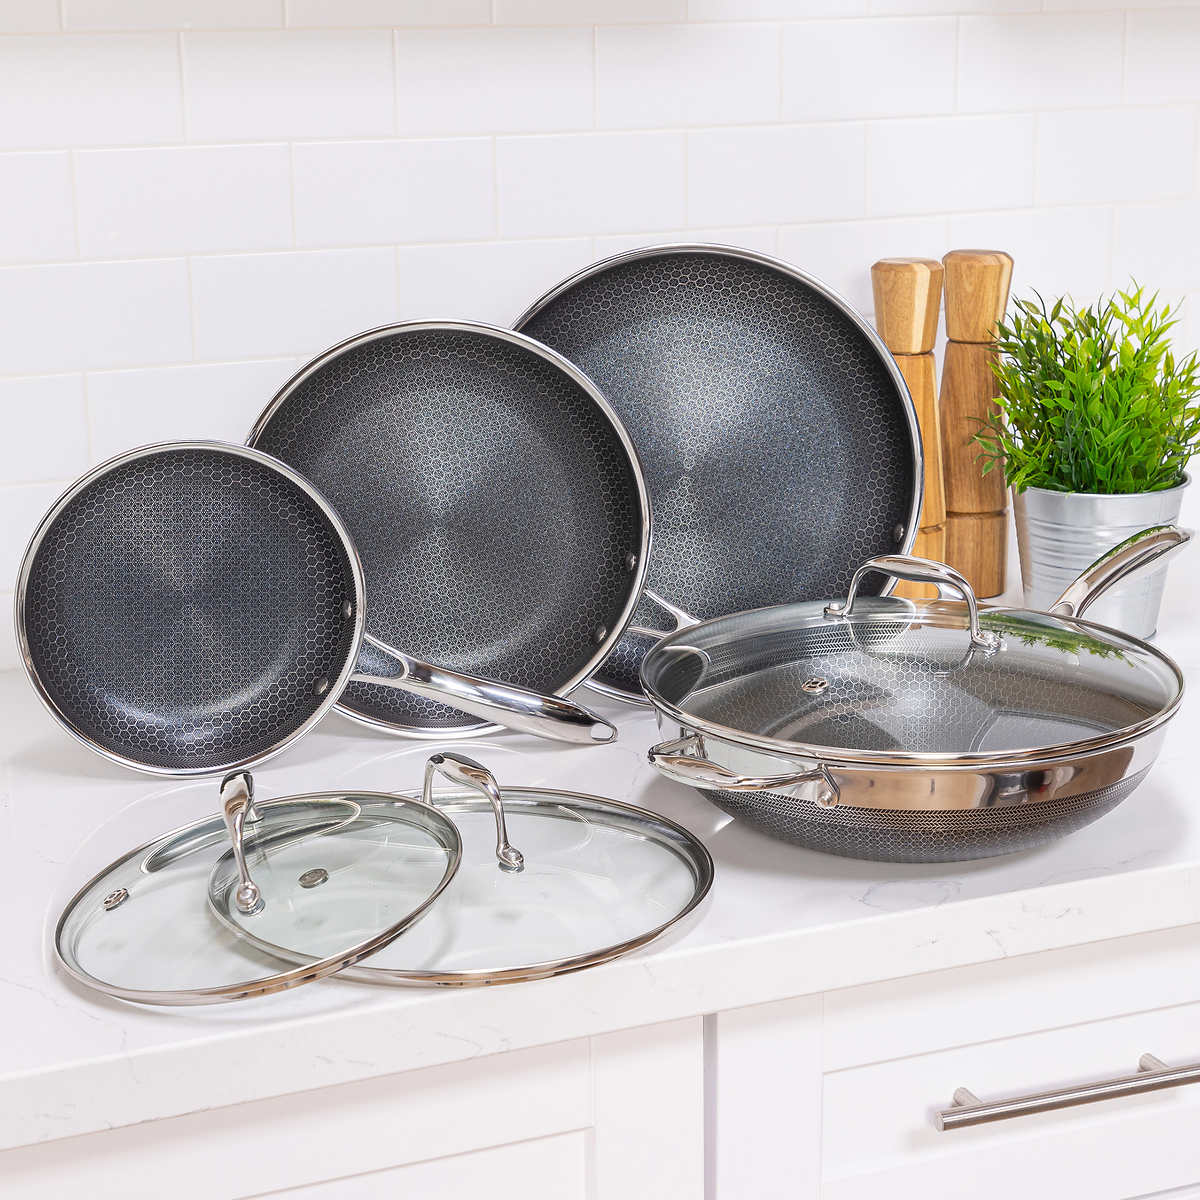 Country Kitchen country kitchen 13 piece pots and pans set - safe nonstick  kitchen cookware with removable handle, rv cookware set, oven safe